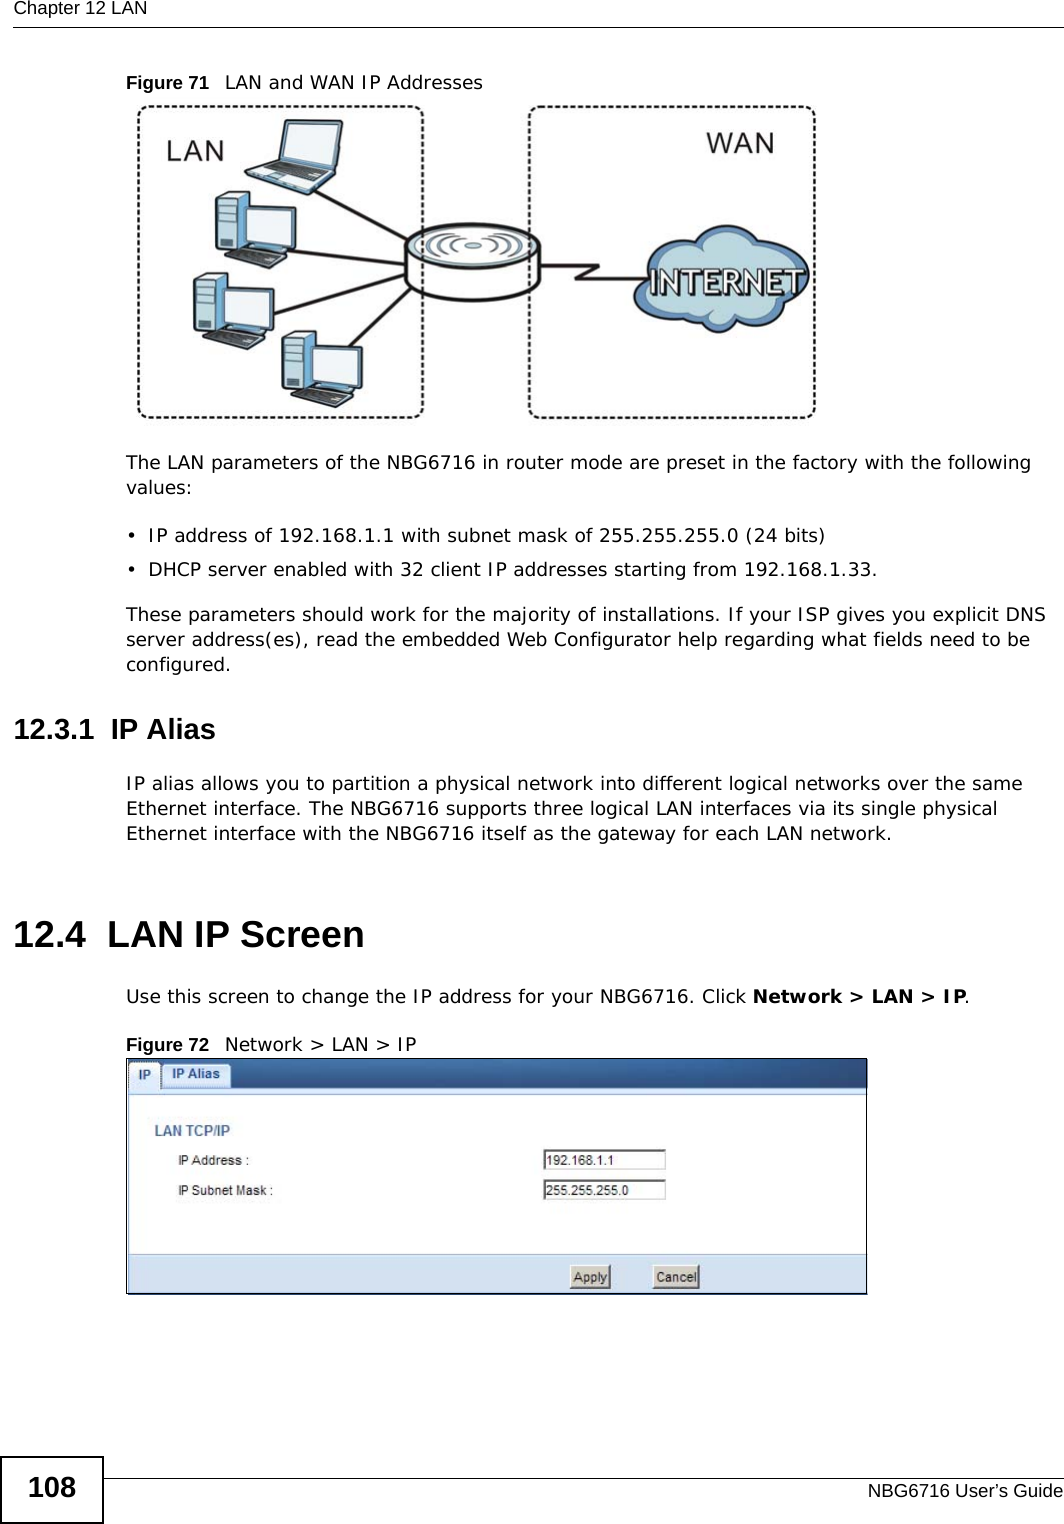 Chapter 12 LANNBG6716 User’s Guide108Figure 71   LAN and WAN IP AddressesThe LAN parameters of the NBG6716 in router mode are preset in the factory with the following values:• IP address of 192.168.1.1 with subnet mask of 255.255.255.0 (24 bits)• DHCP server enabled with 32 client IP addresses starting from 192.168.1.33. These parameters should work for the majority of installations. If your ISP gives you explicit DNS server address(es), read the embedded Web Configurator help regarding what fields need to be configured.12.3.1  IP AliasIP alias allows you to partition a physical network into different logical networks over the same Ethernet interface. The NBG6716 supports three logical LAN interfaces via its single physical Ethernet interface with the NBG6716 itself as the gateway for each LAN network.12.4  LAN IP ScreenUse this screen to change the IP address for your NBG6716. Click Network &gt; LAN &gt; IP.Figure 72   Network &gt; LAN &gt; IP 